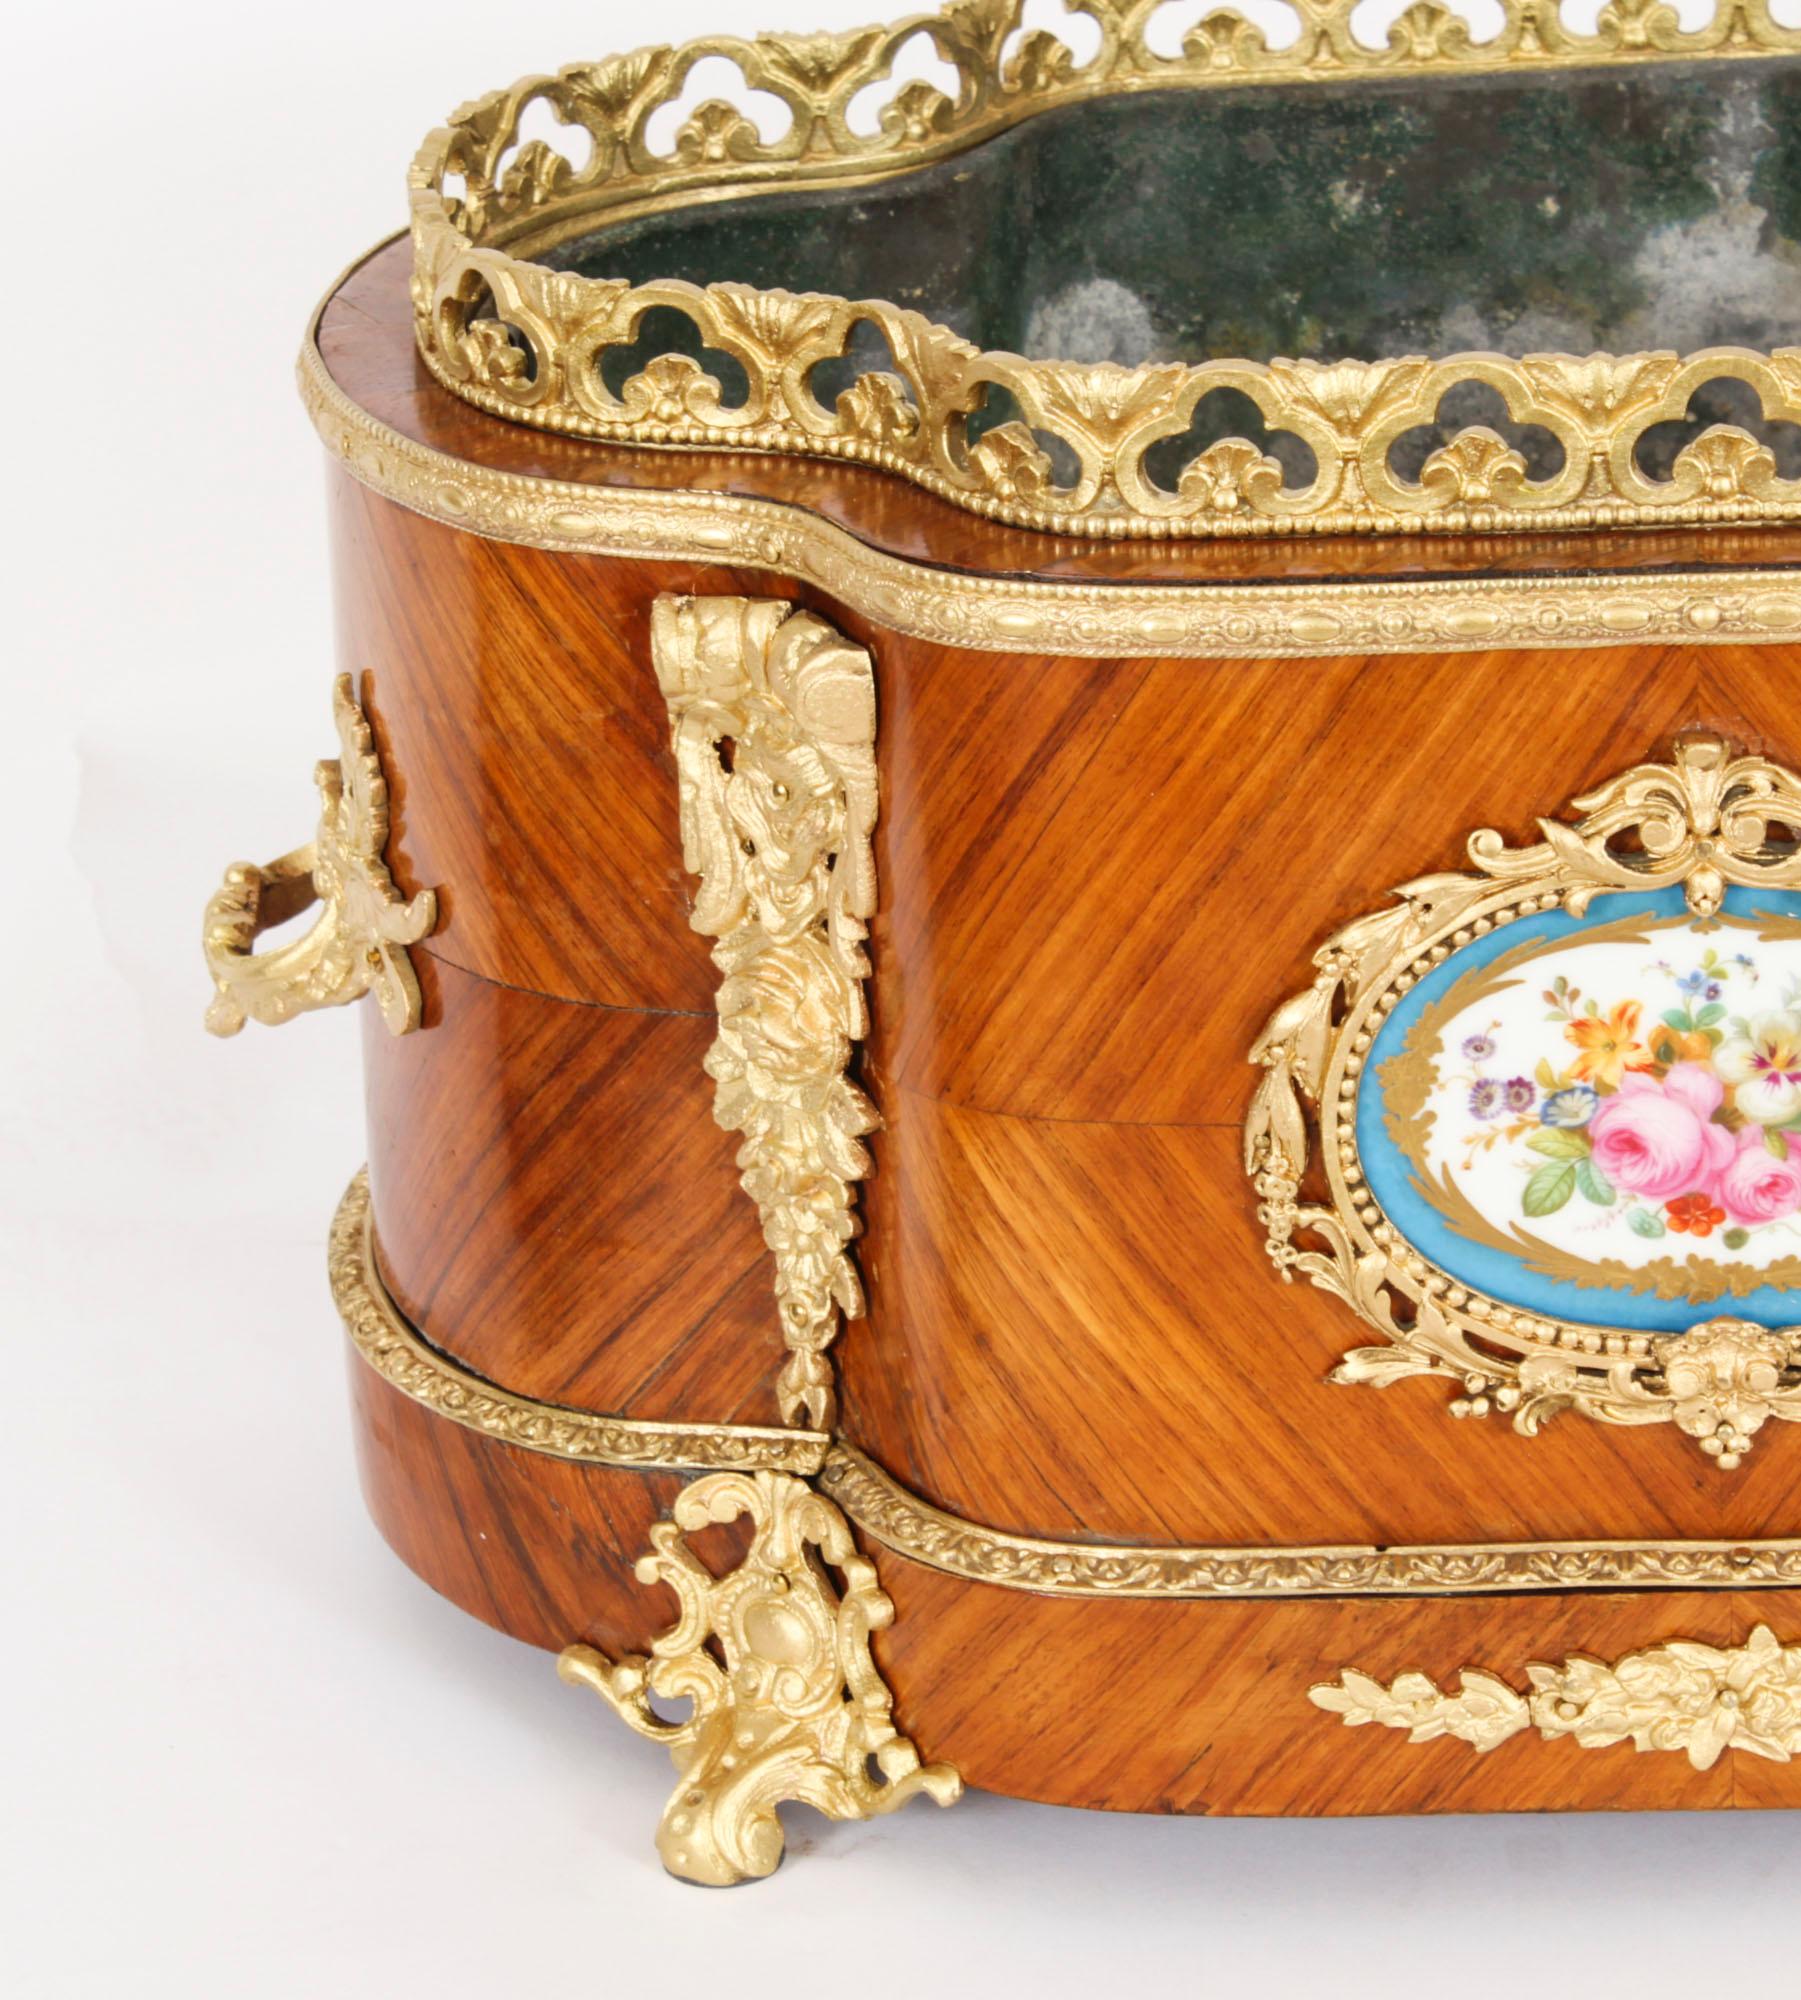 Antique French Sevres Porcelain Ormolu Mounted Planter Jardiniere 19th Century For Sale 7